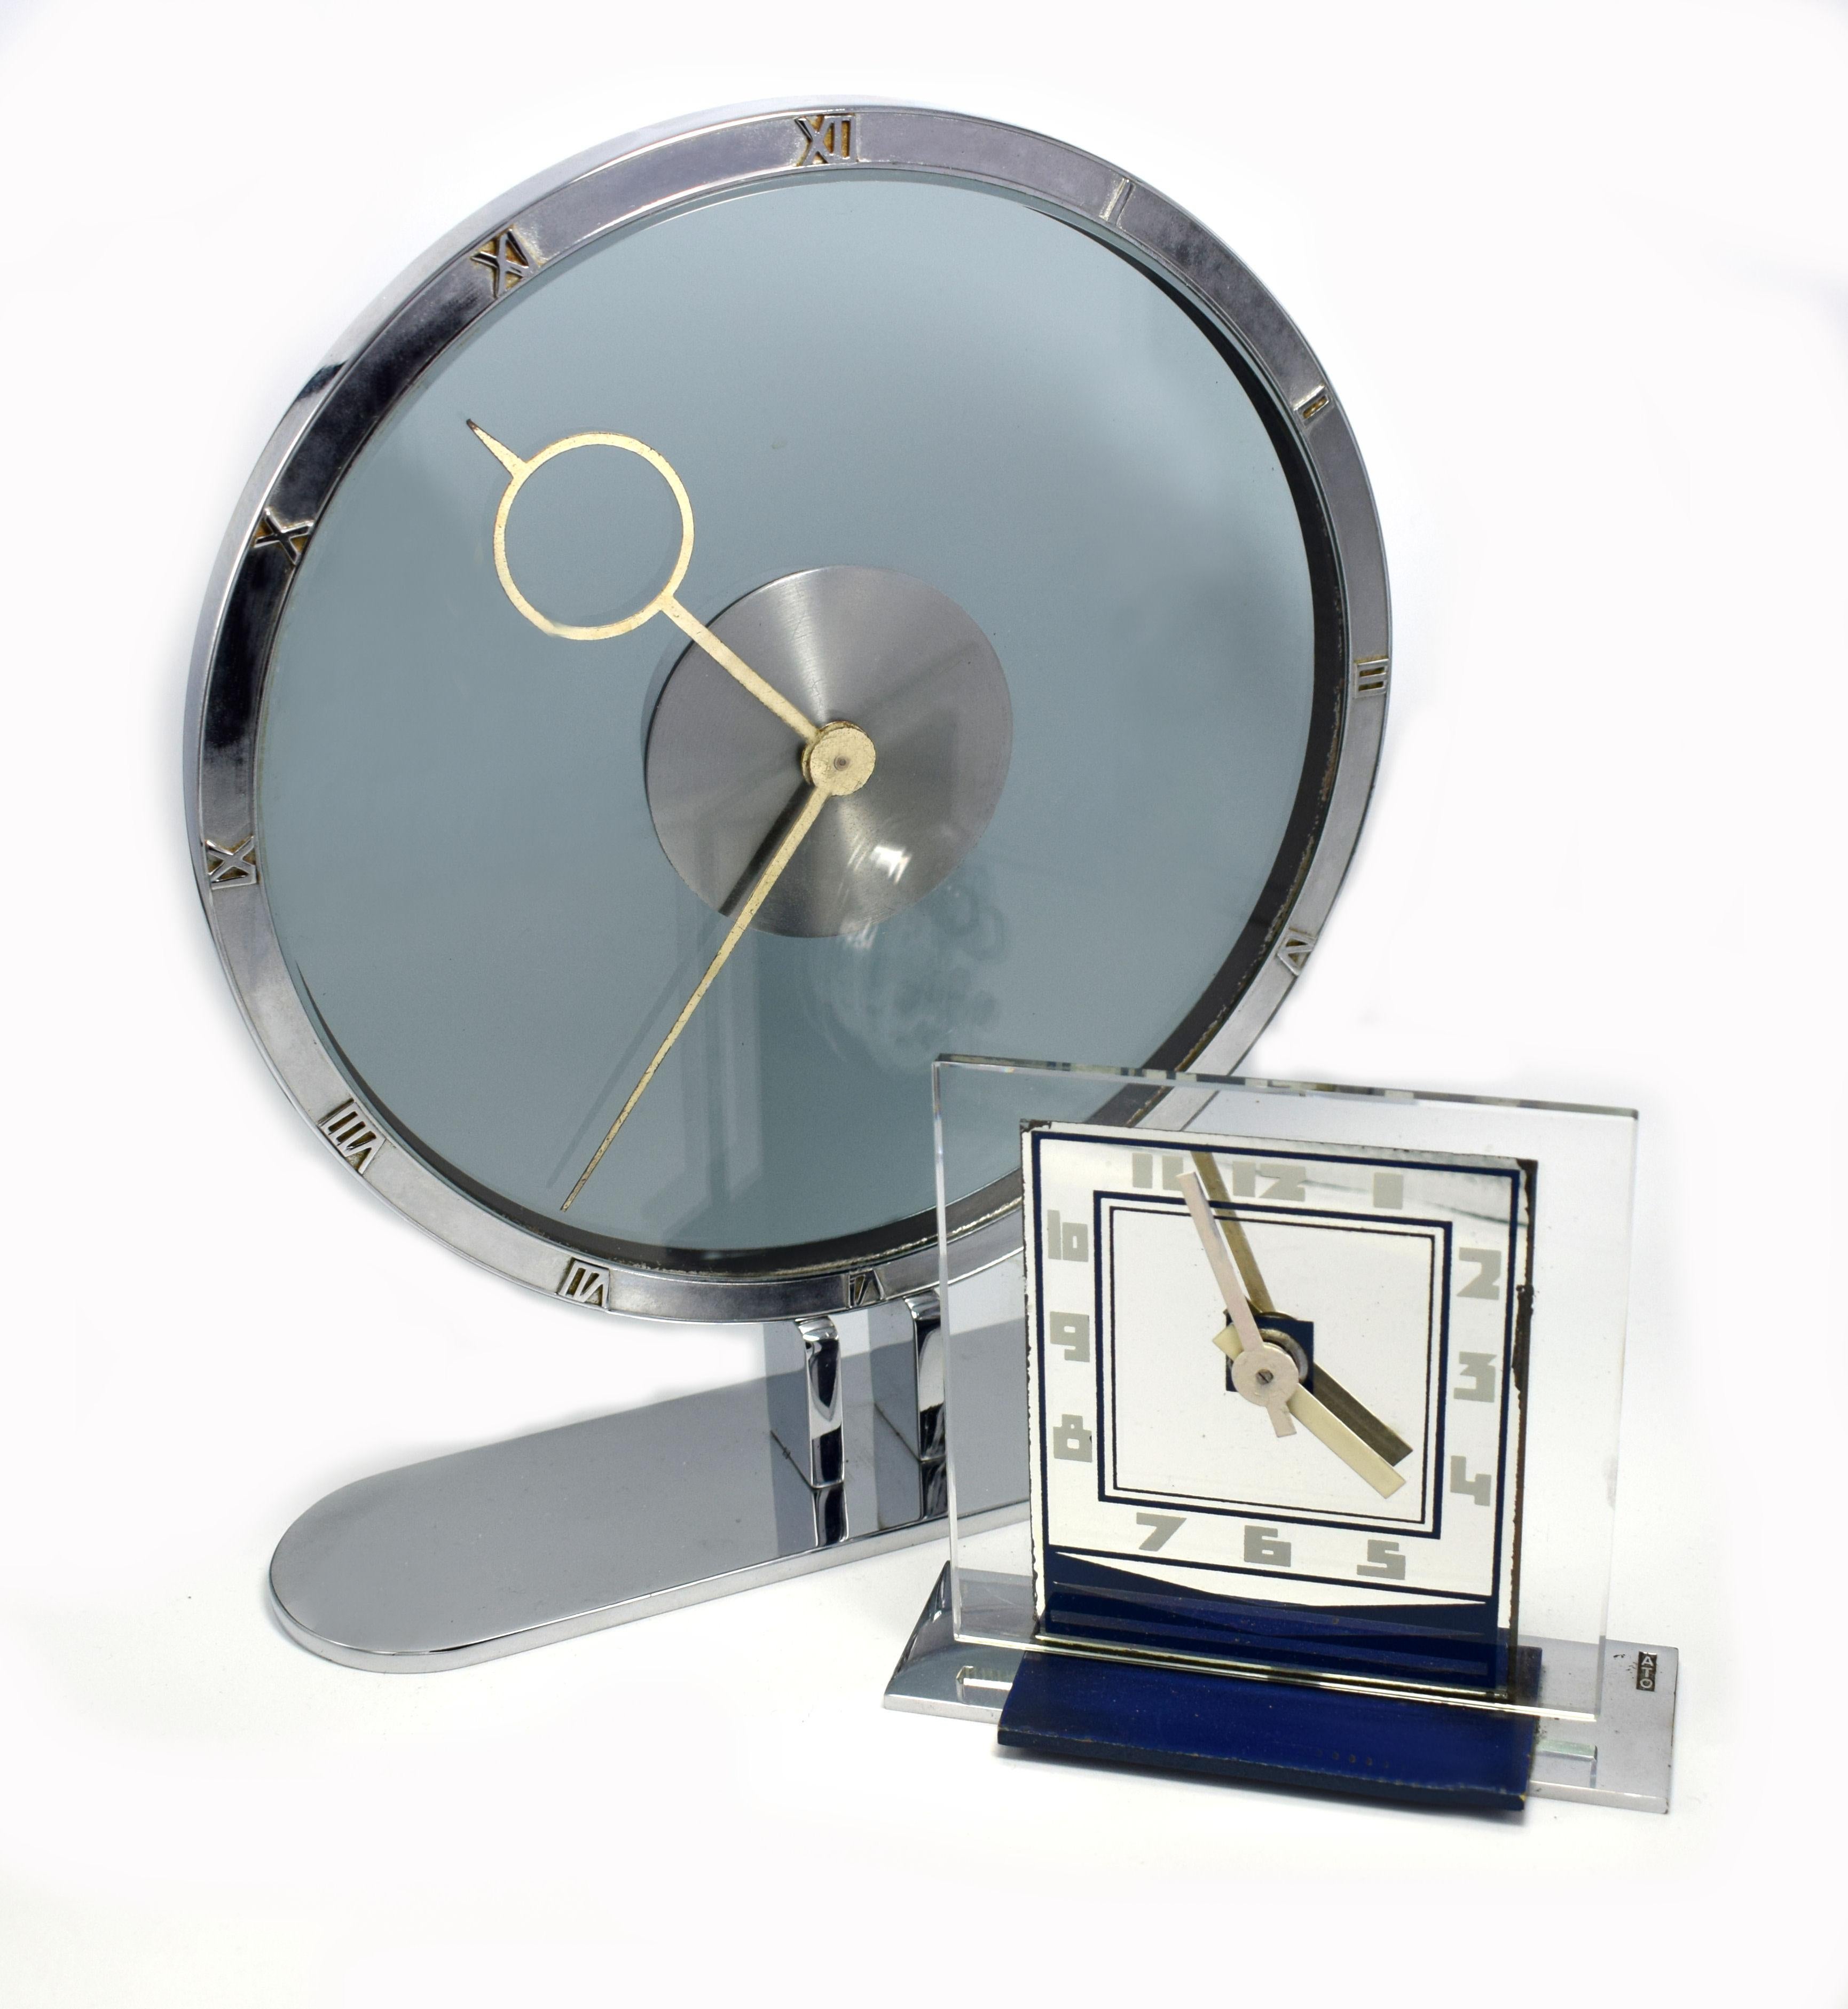 Superbly stylish is this wonderful Art Deco 8 day mystery clock by Kienzel. Beautiful pale blue /grey colored glass and nickel plated desk timepiece, typical of the 1930s and totally authentic. The nickel case is polished and lacquered. The chapter